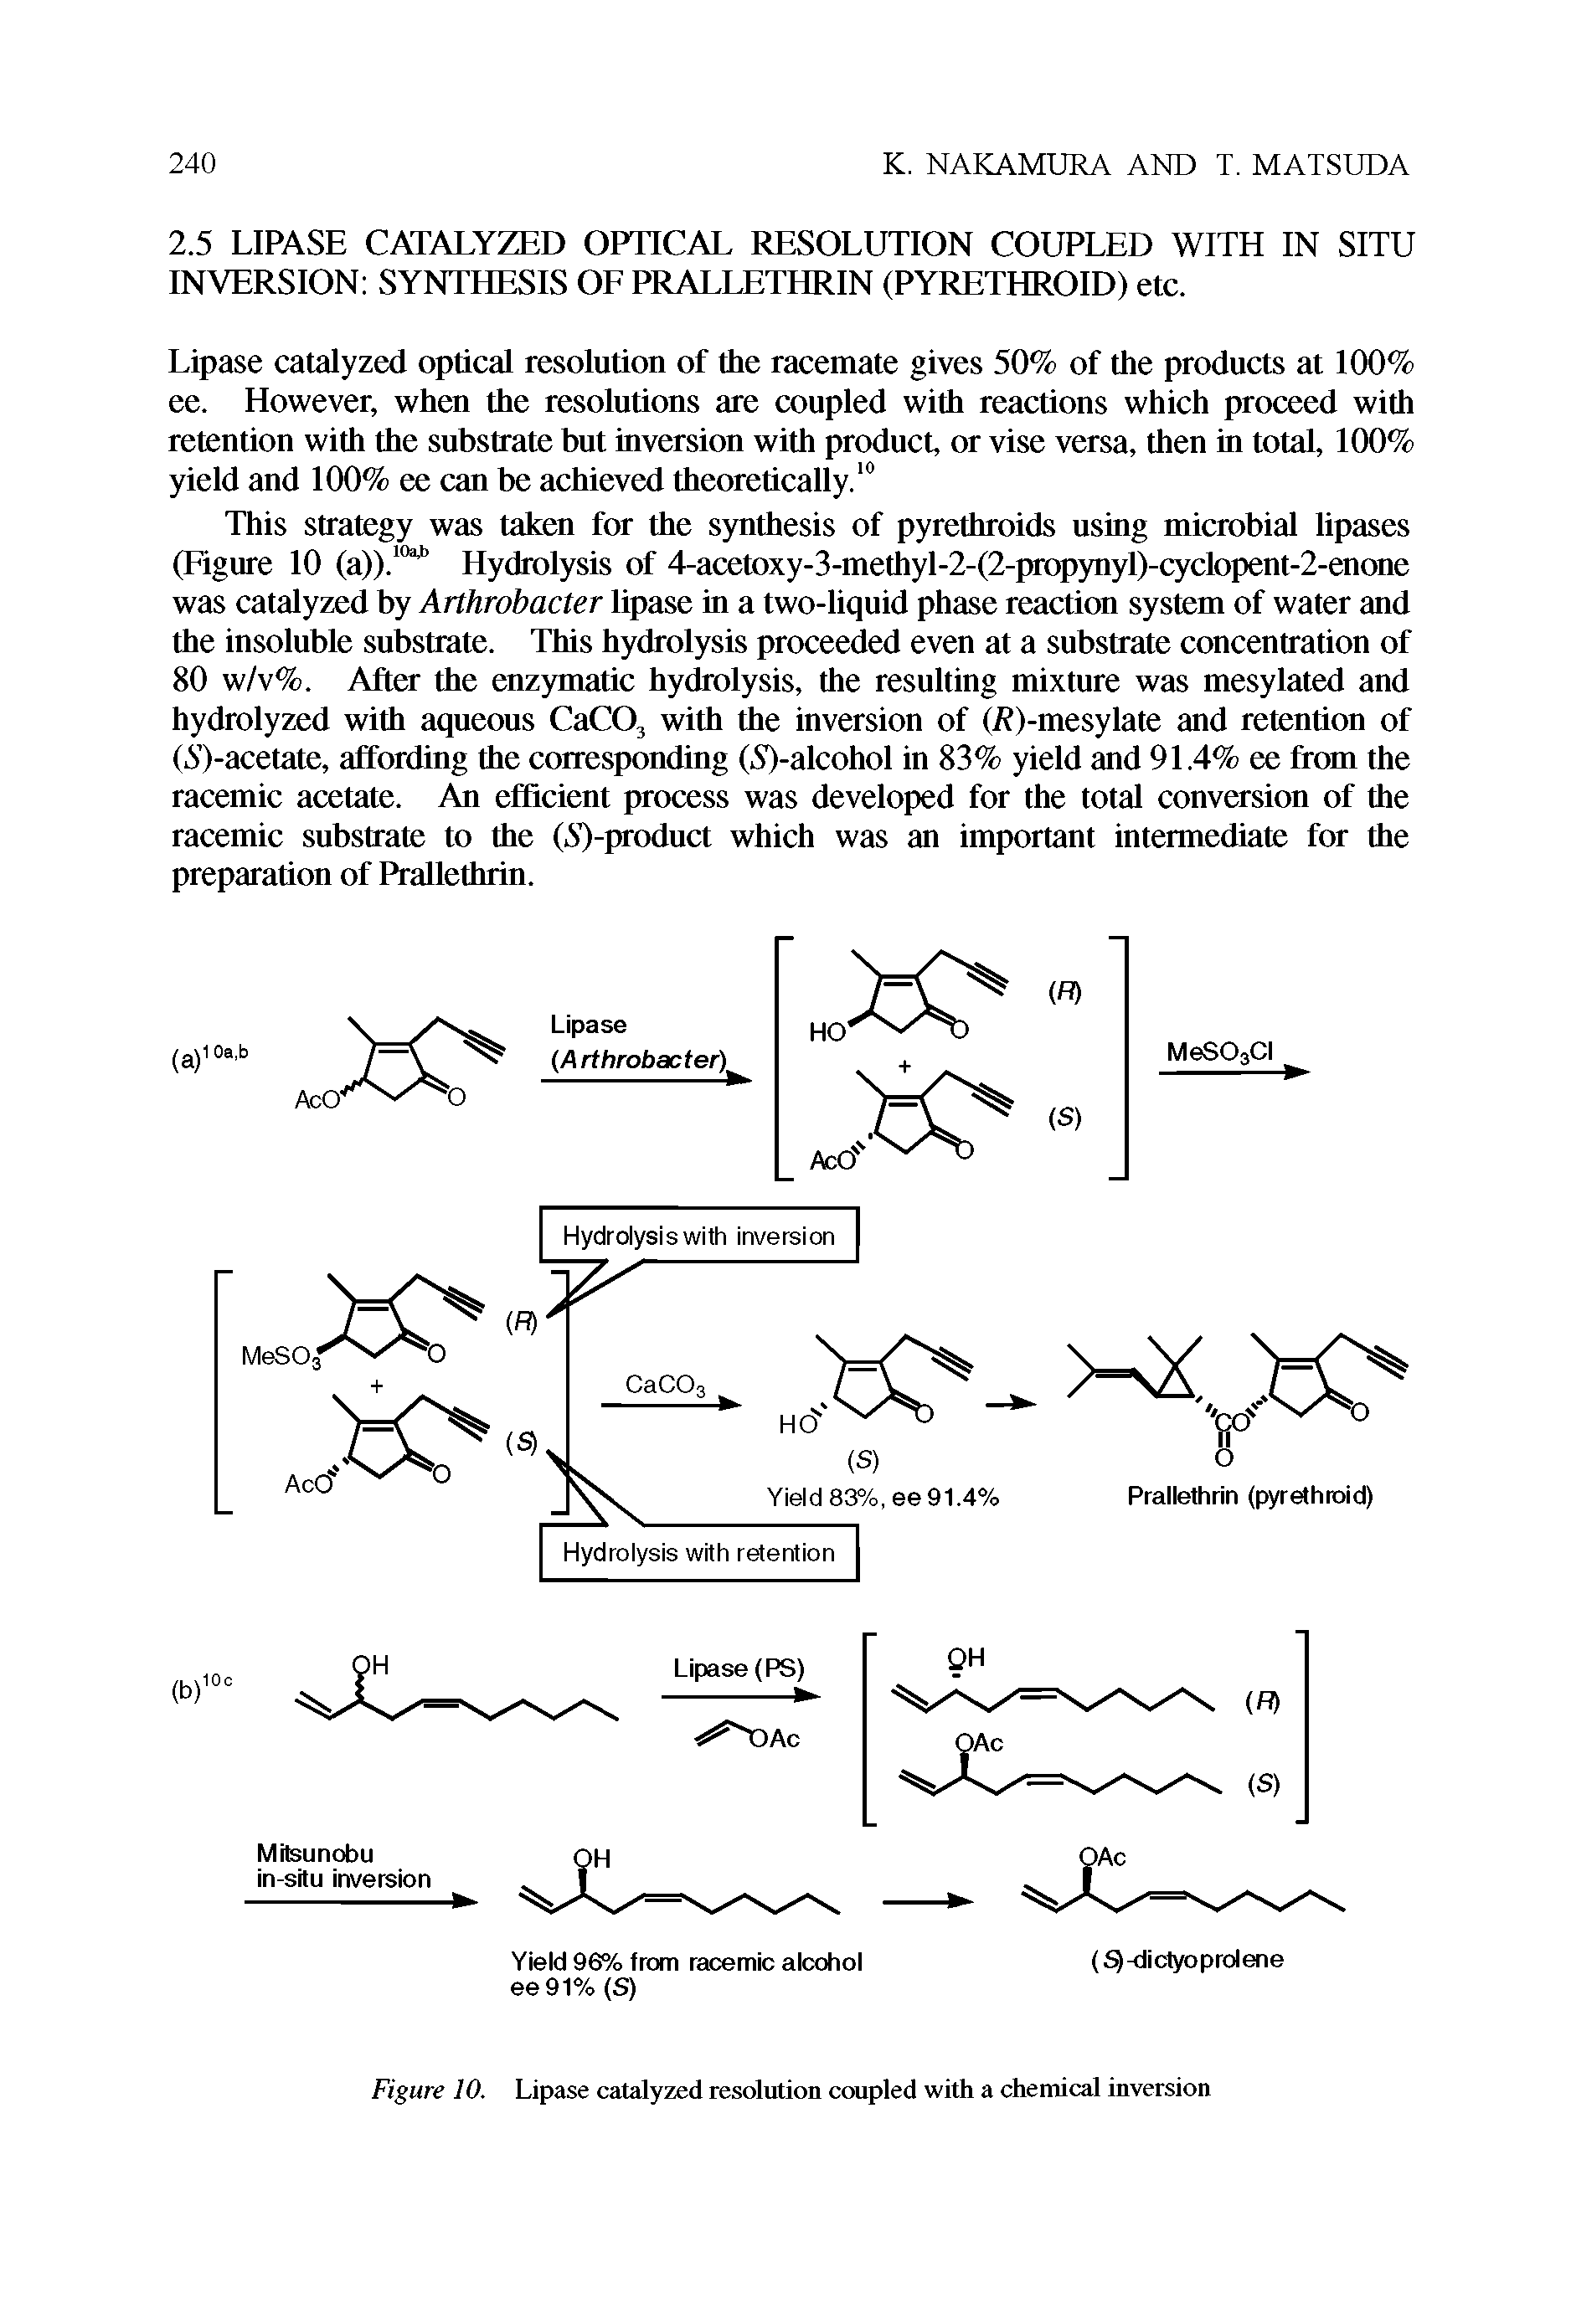 Figure 10. Lipase catalyzed resolution coupled with a chemical inversion...